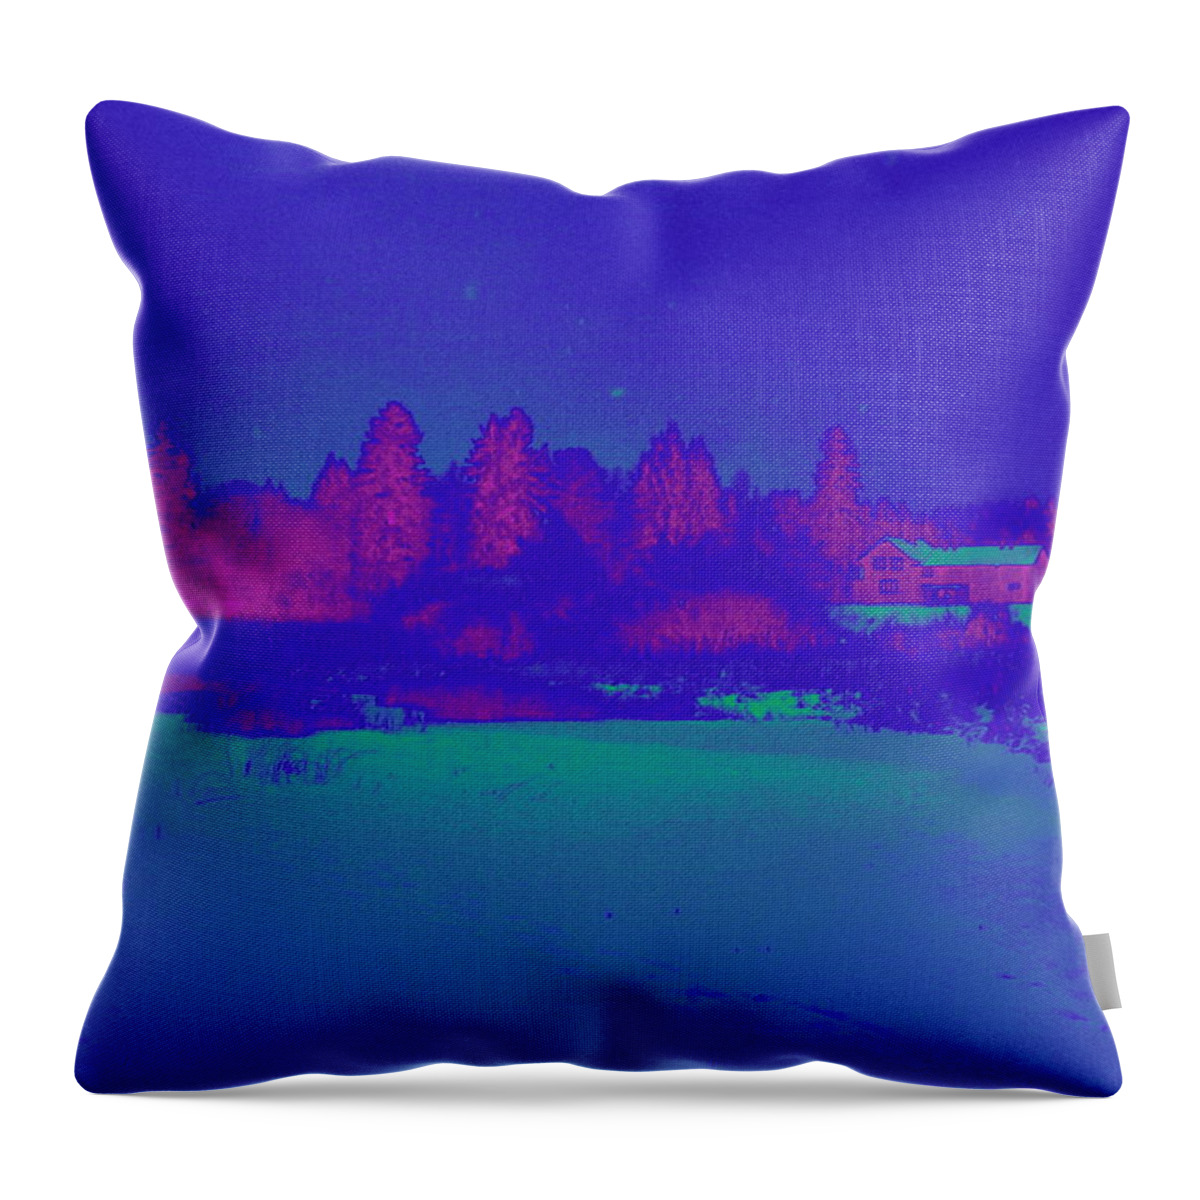 Finland Throw Pillow featuring the photograph Knuutila infrared by Jouko Lehto